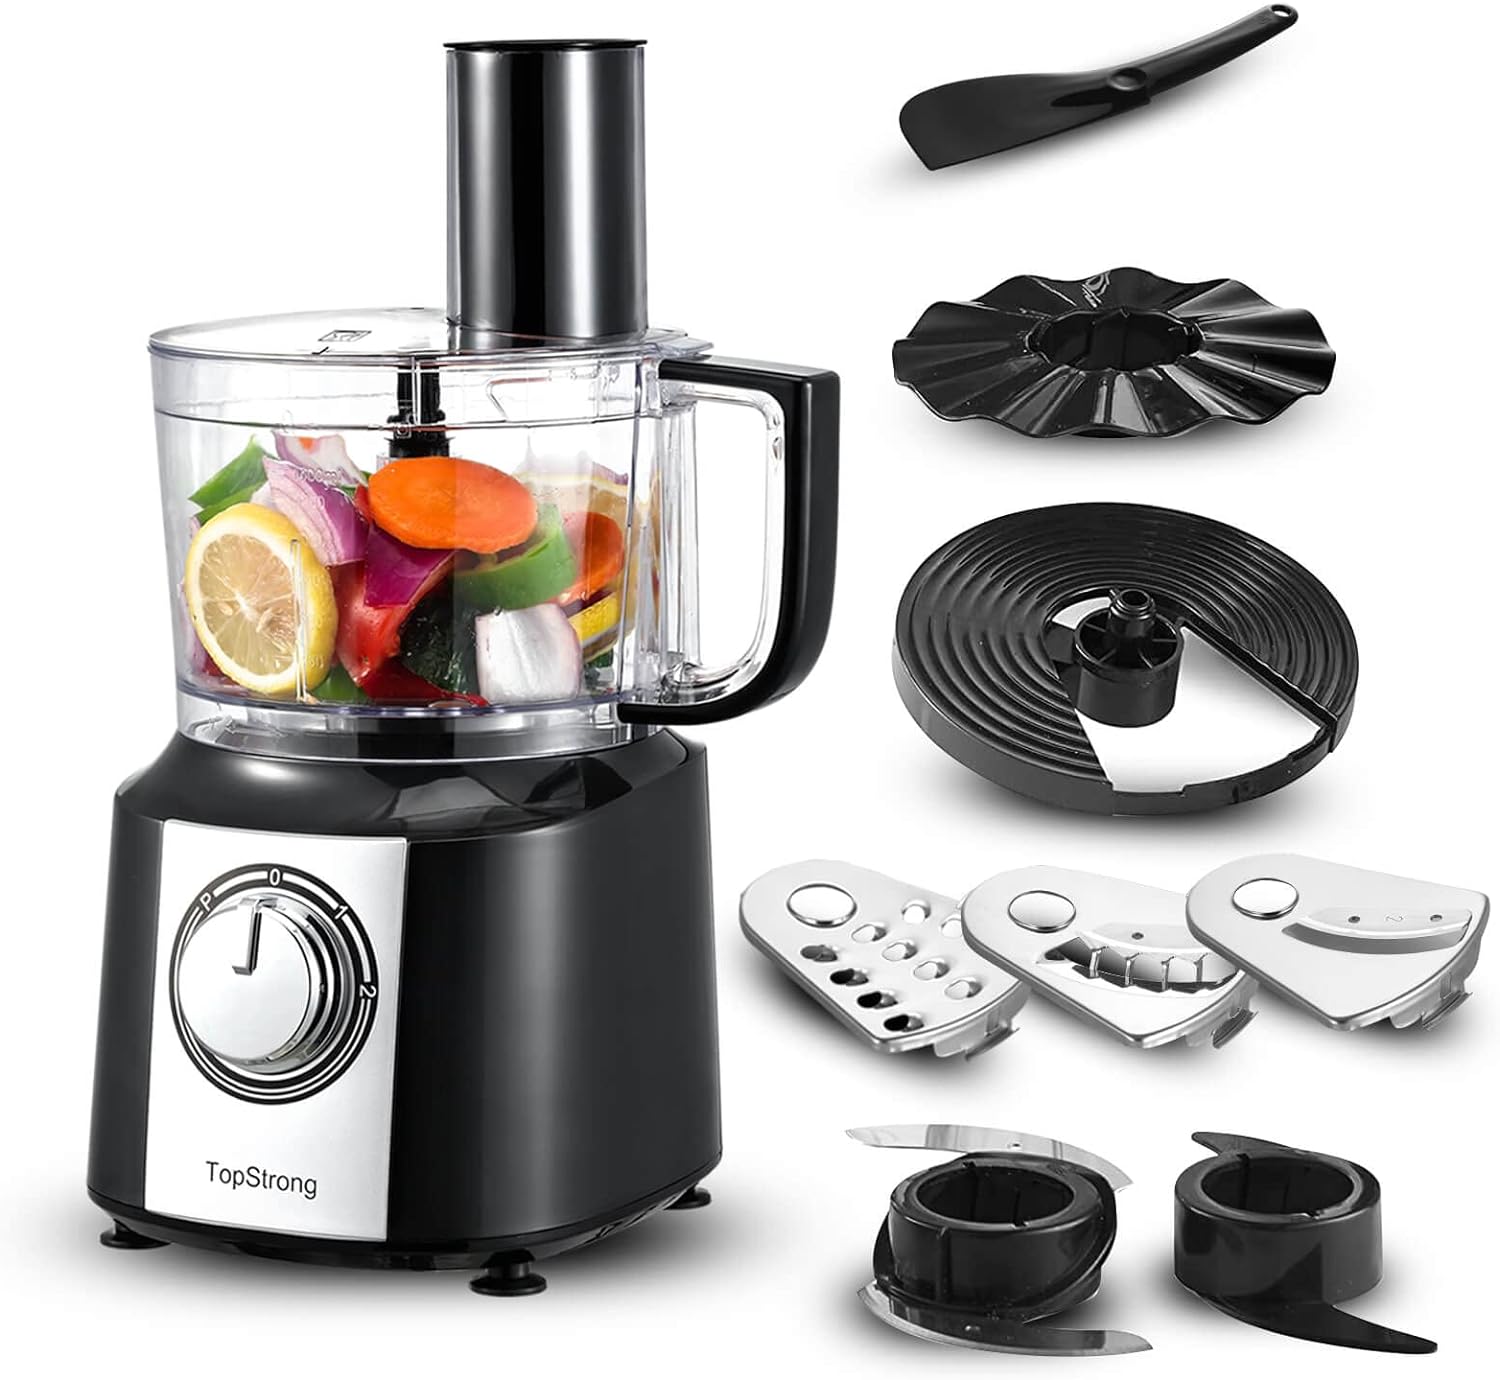 TopStrong Food Processor, 800 W Food Processor Chopper, 2 L Food Processor, Multi-Chopper, Compact Food Processor Including 3 Cutting Discs, Chopper, Kneading Machine, Whisk, Whisk